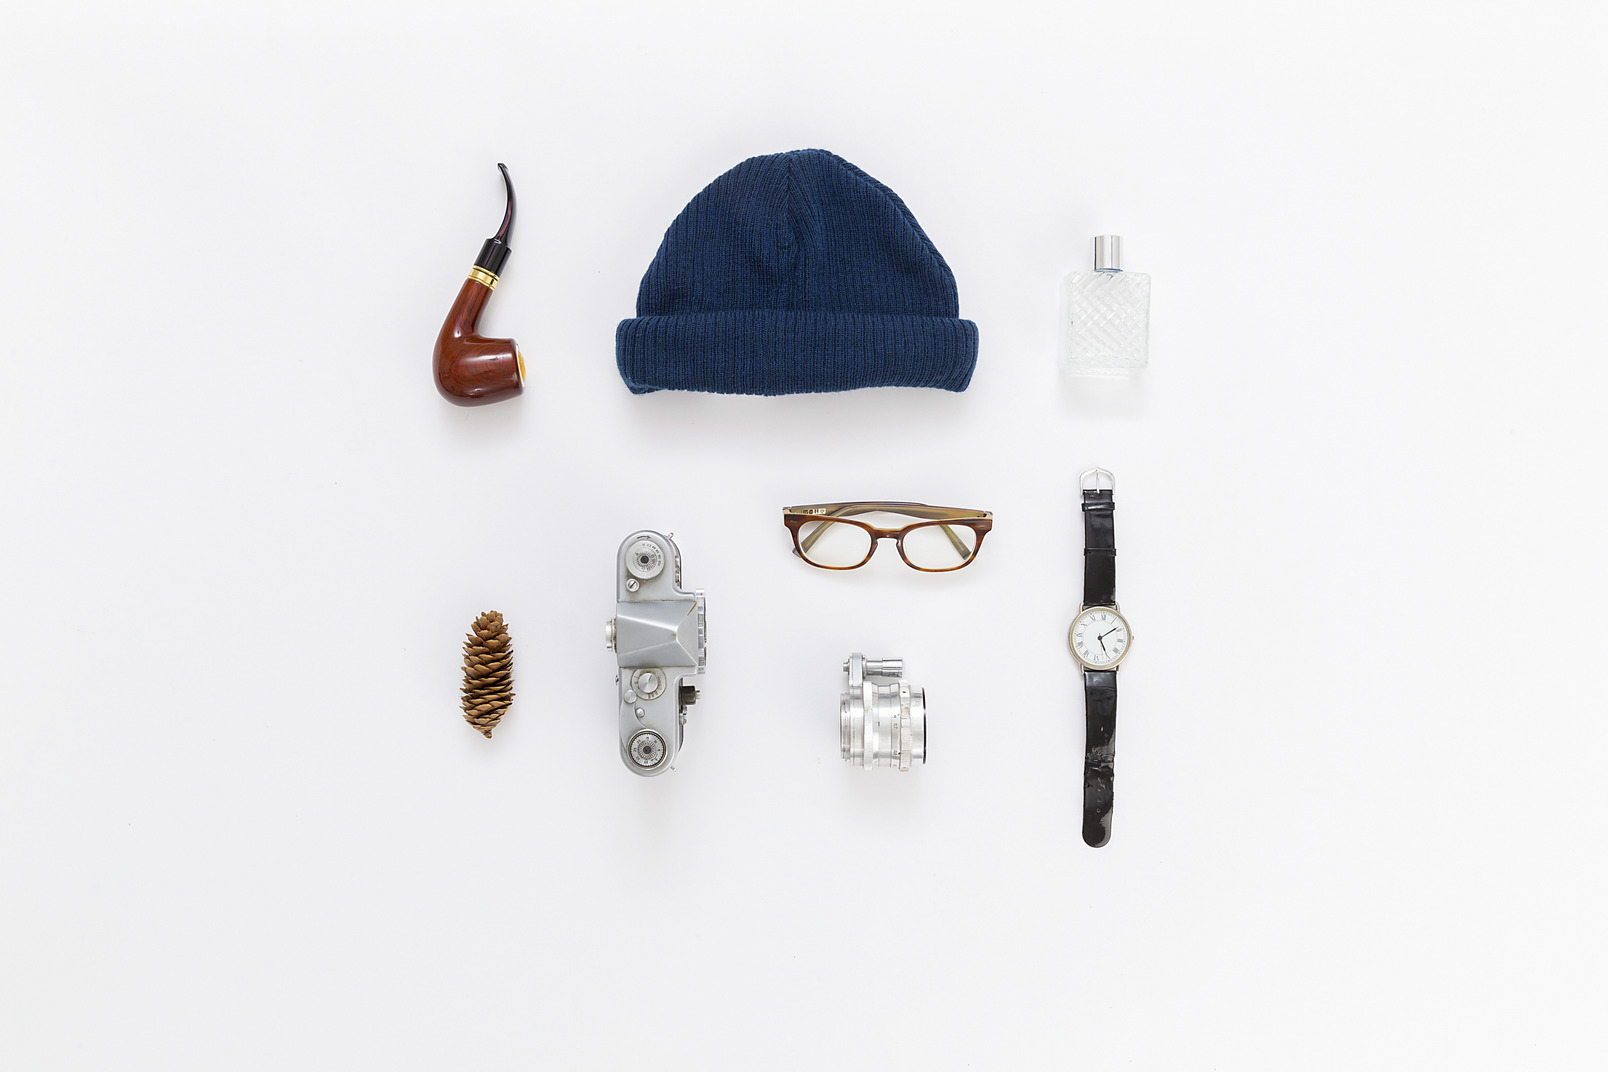 Hat, glasses, watch, smoking pipe, perfume bottle and other stuff